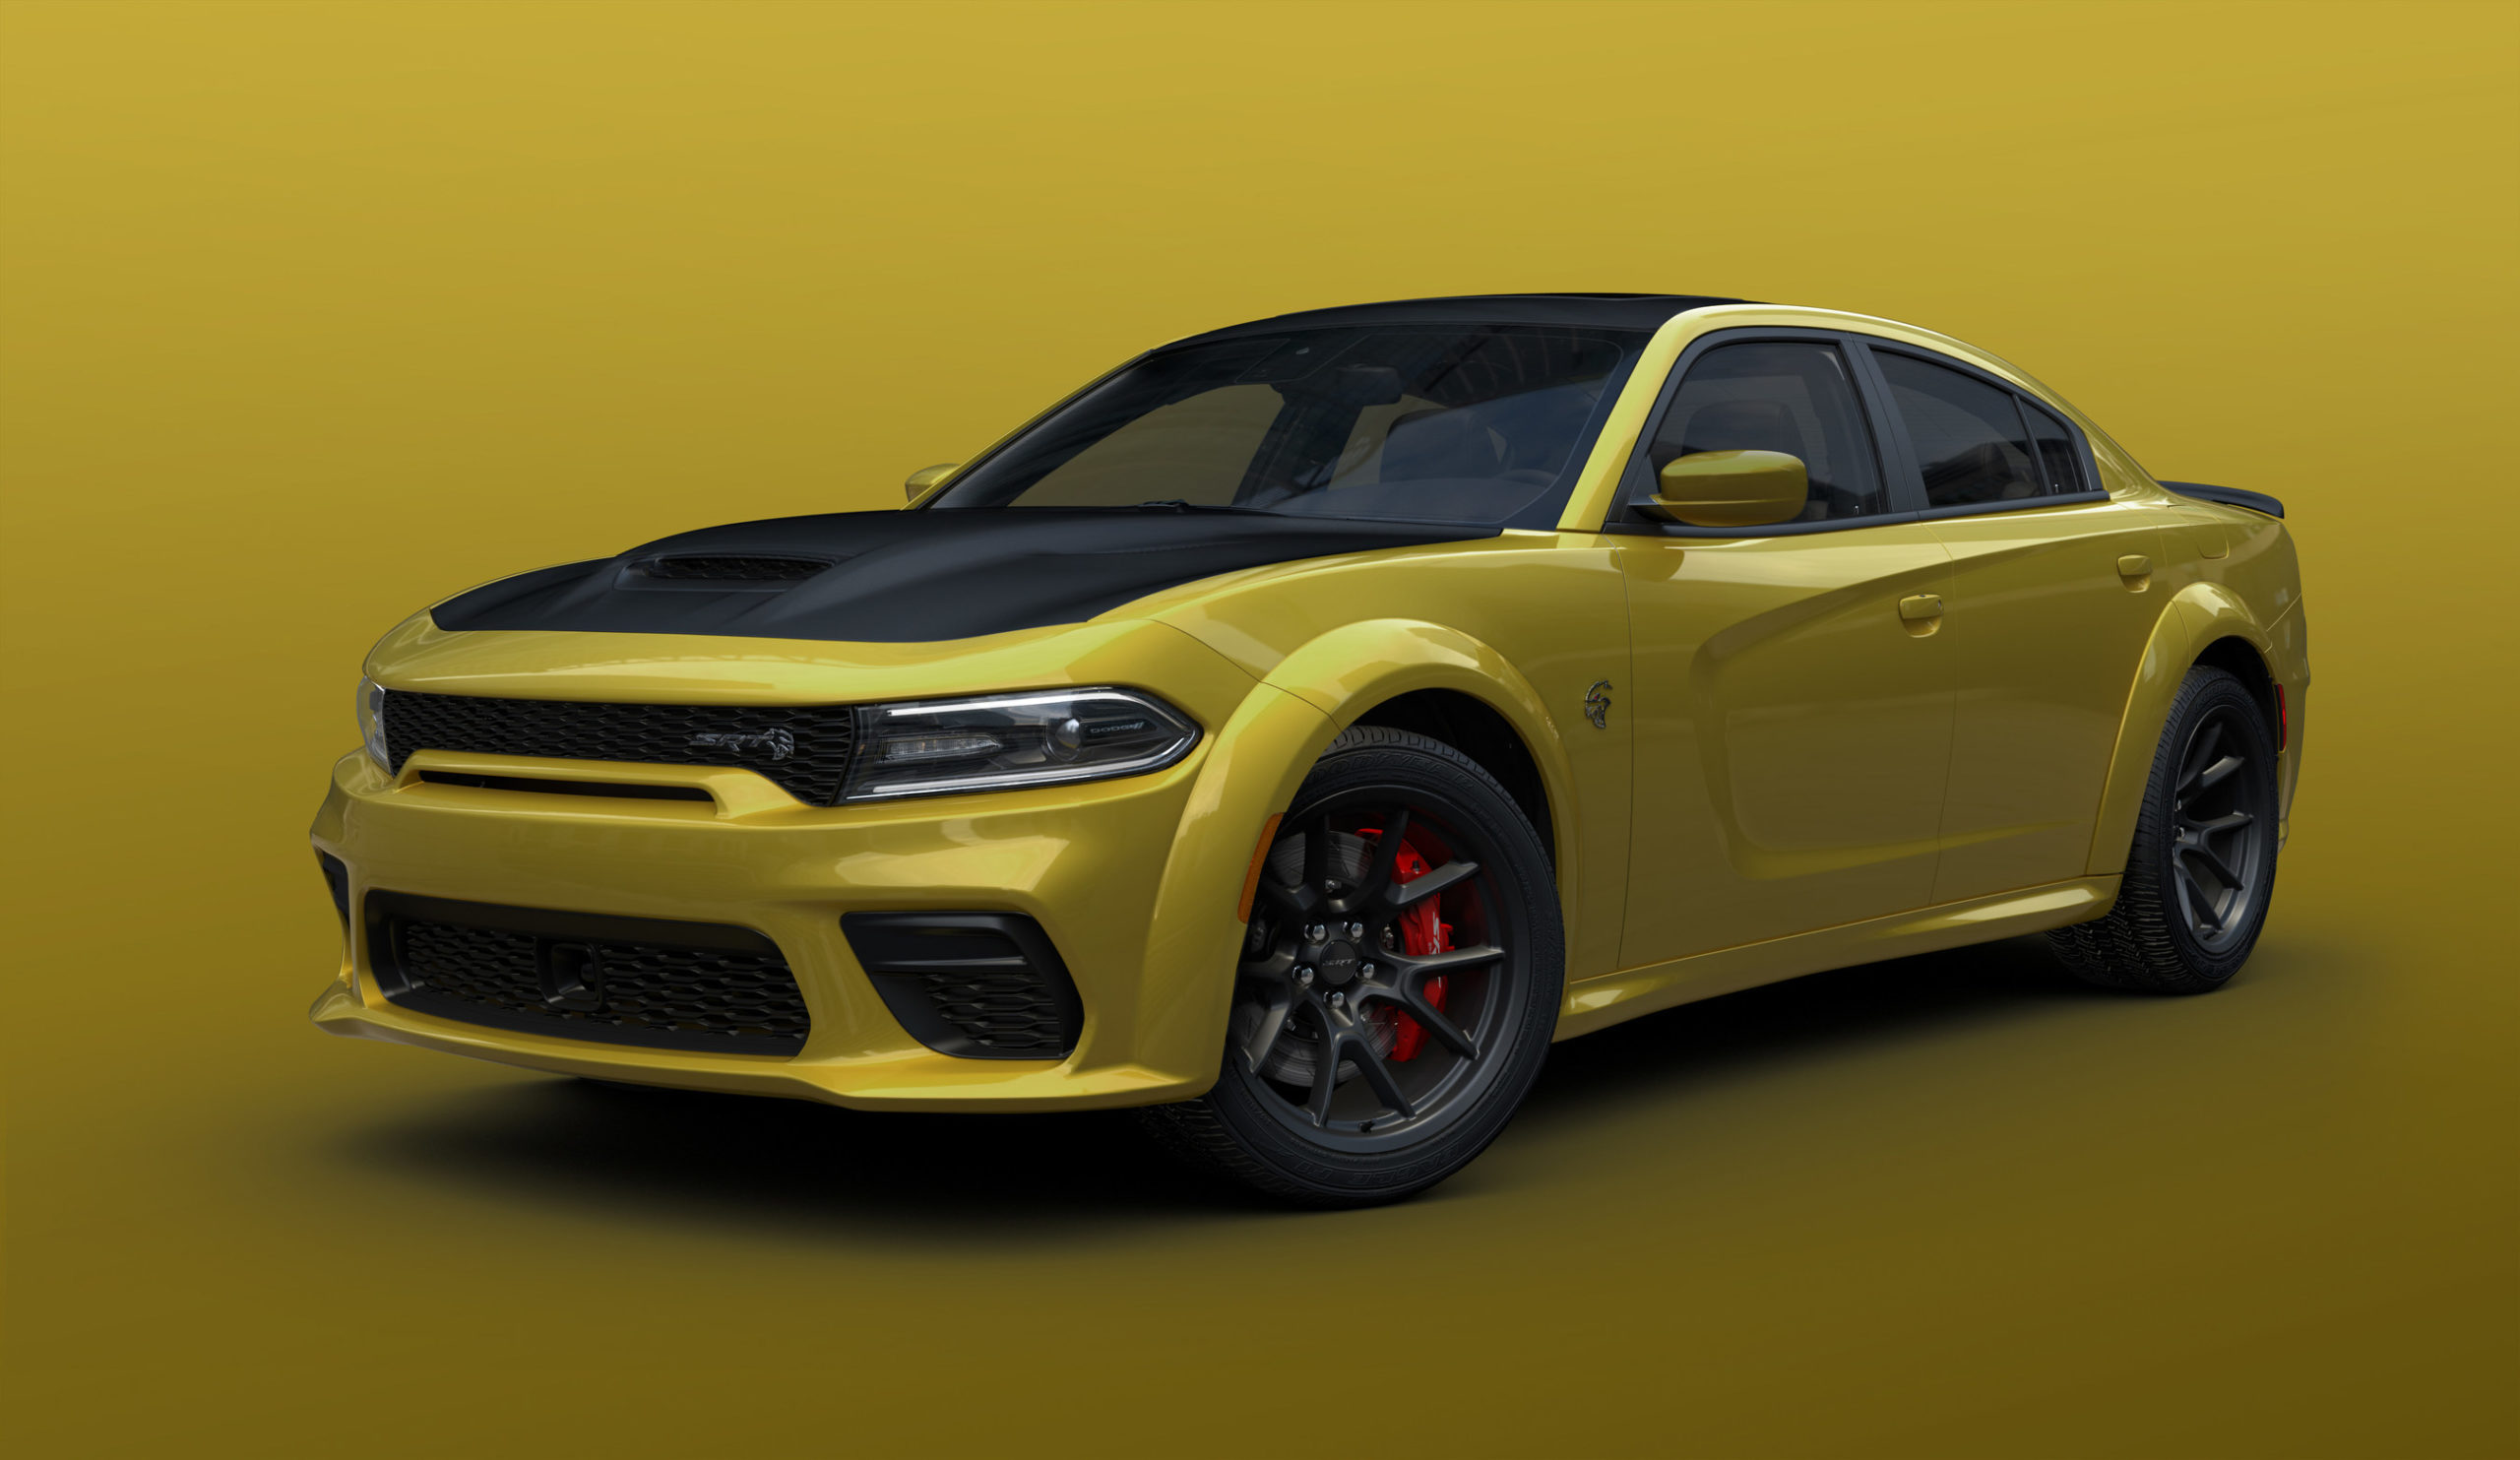 Dodge Extends ‘Gold Rush’ Paint Color to Performance Charger Models | THE SHOP